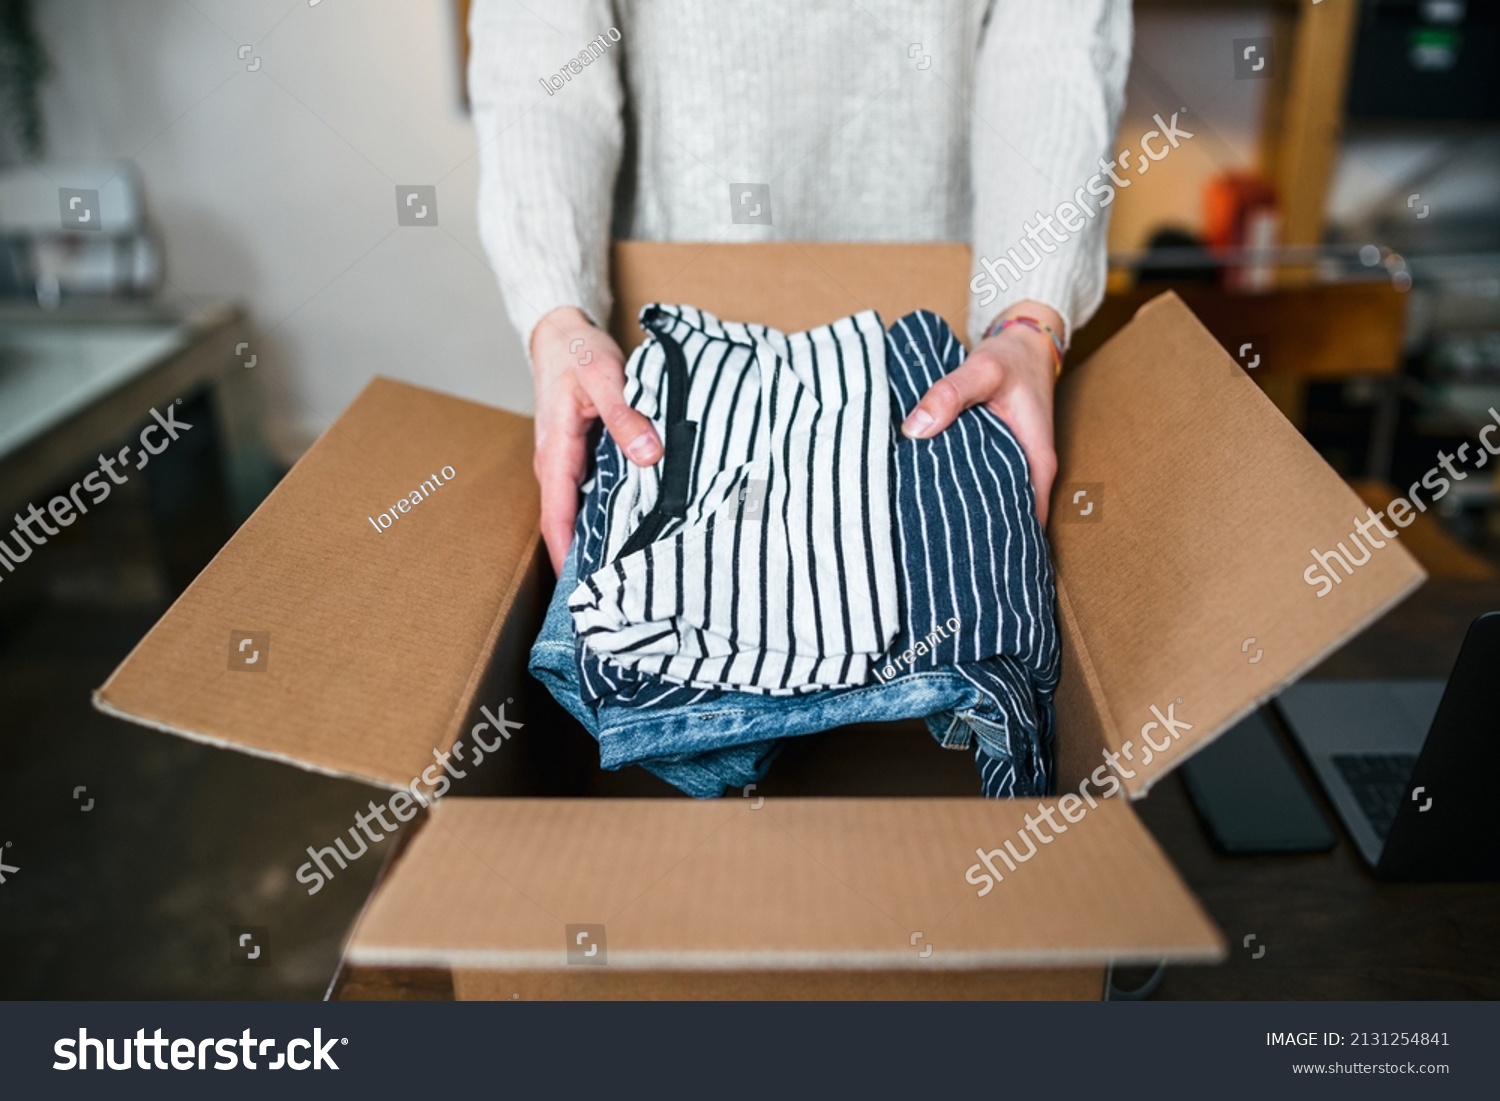 Business woman prepares a package in a cardboard box for shipping with clothes from her online store - Millennial sells second-hand used dresses in her home - Start up concept #2131254841